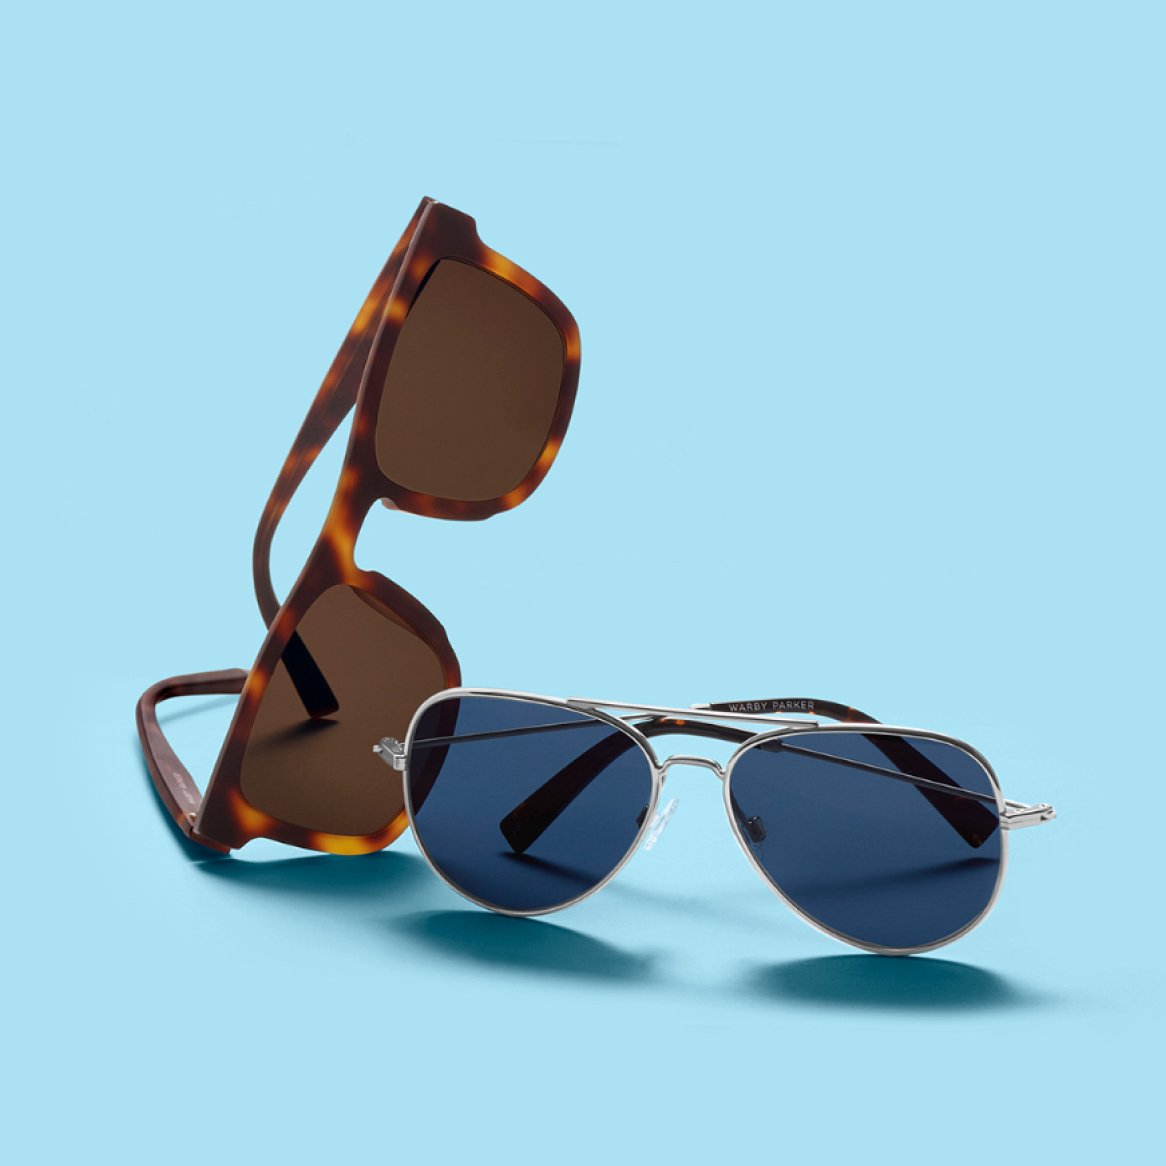 Can I Buy Sunglasses Using My FSA or HSA? - GoodRx